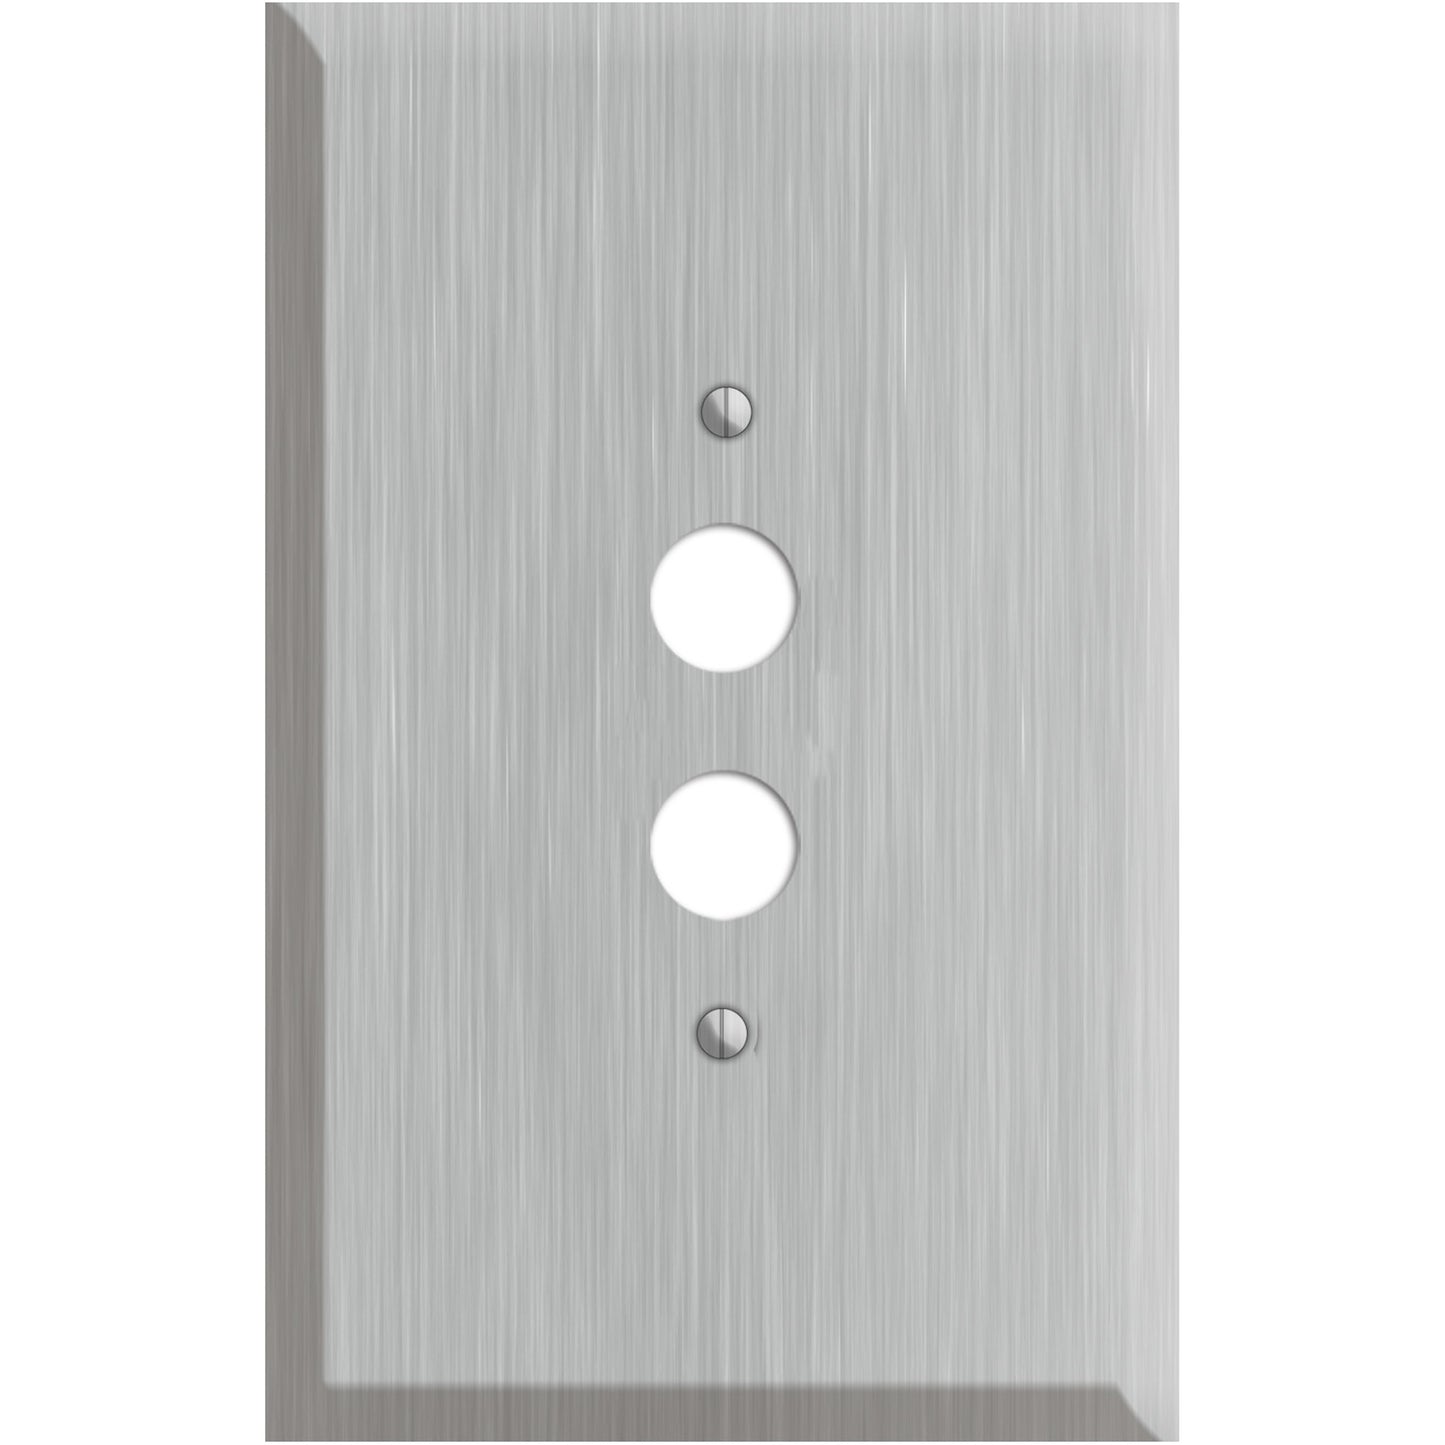 Oversized Discontinued Stainless Steel 1 Pushbutton Wallplate